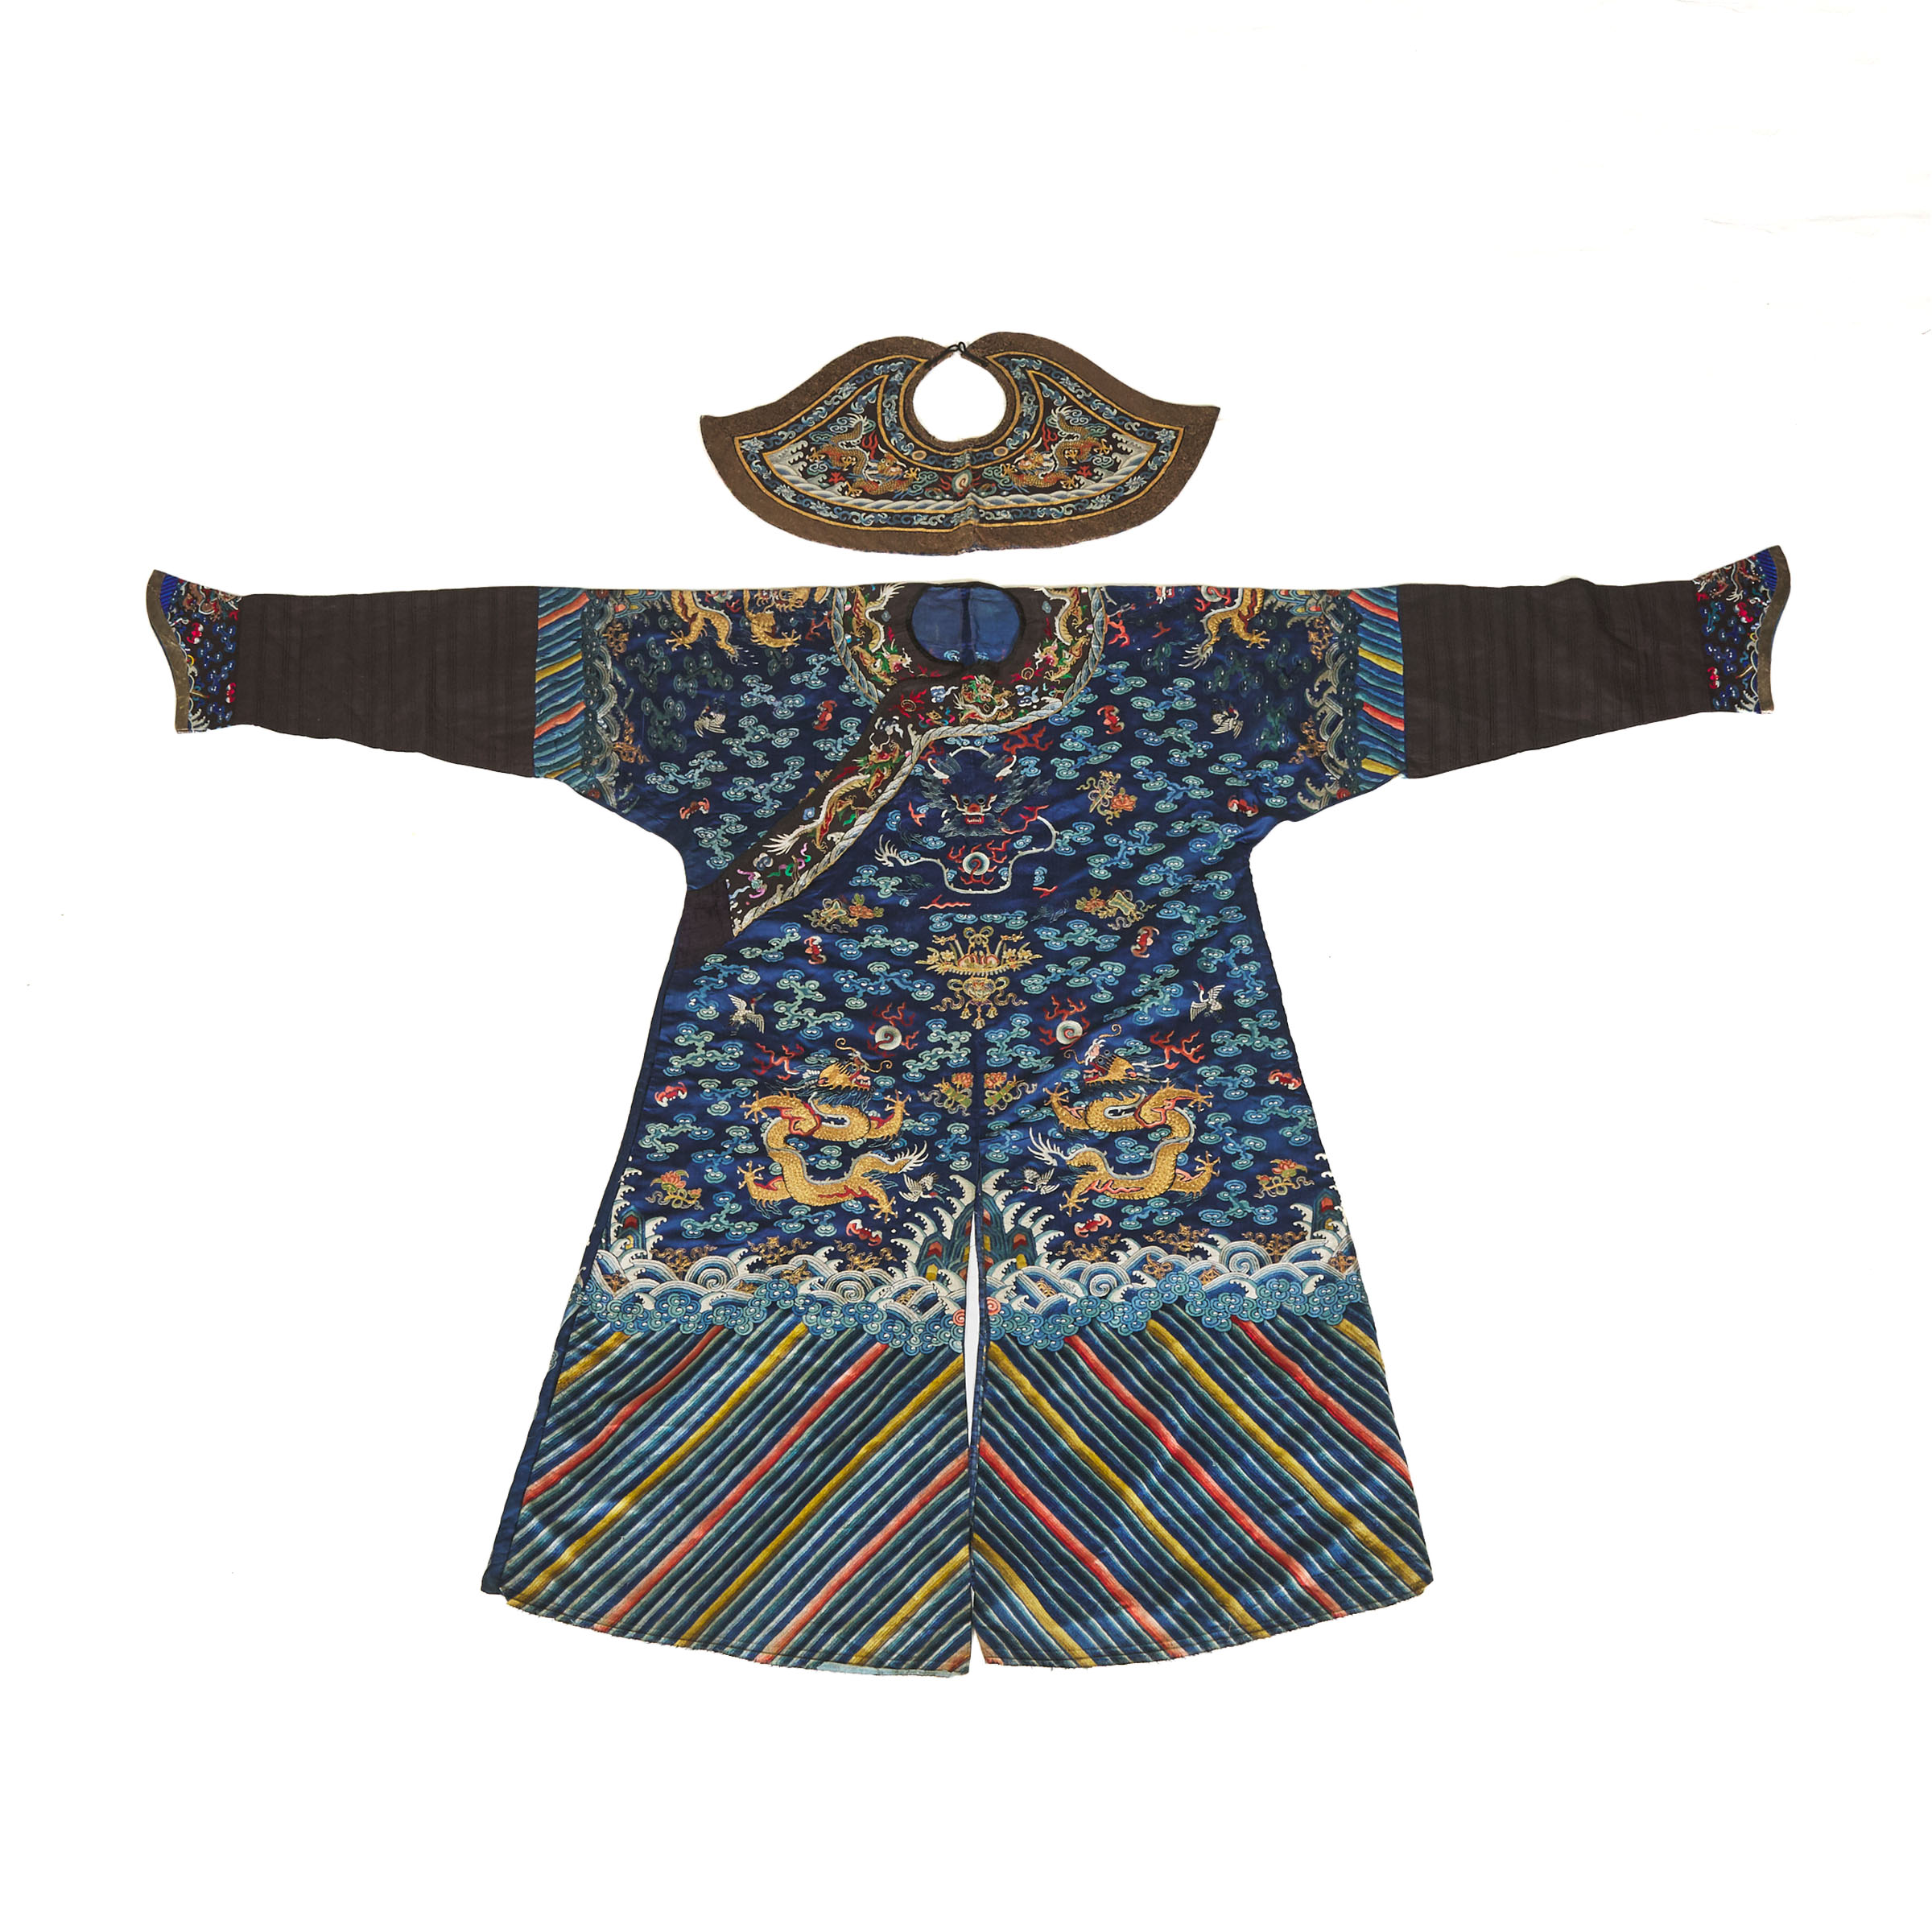 An Embroidered Blue-Ground 'Dragon' Robe, Jifu, Together With a Formal Kesi Collar, Qing Dynasty